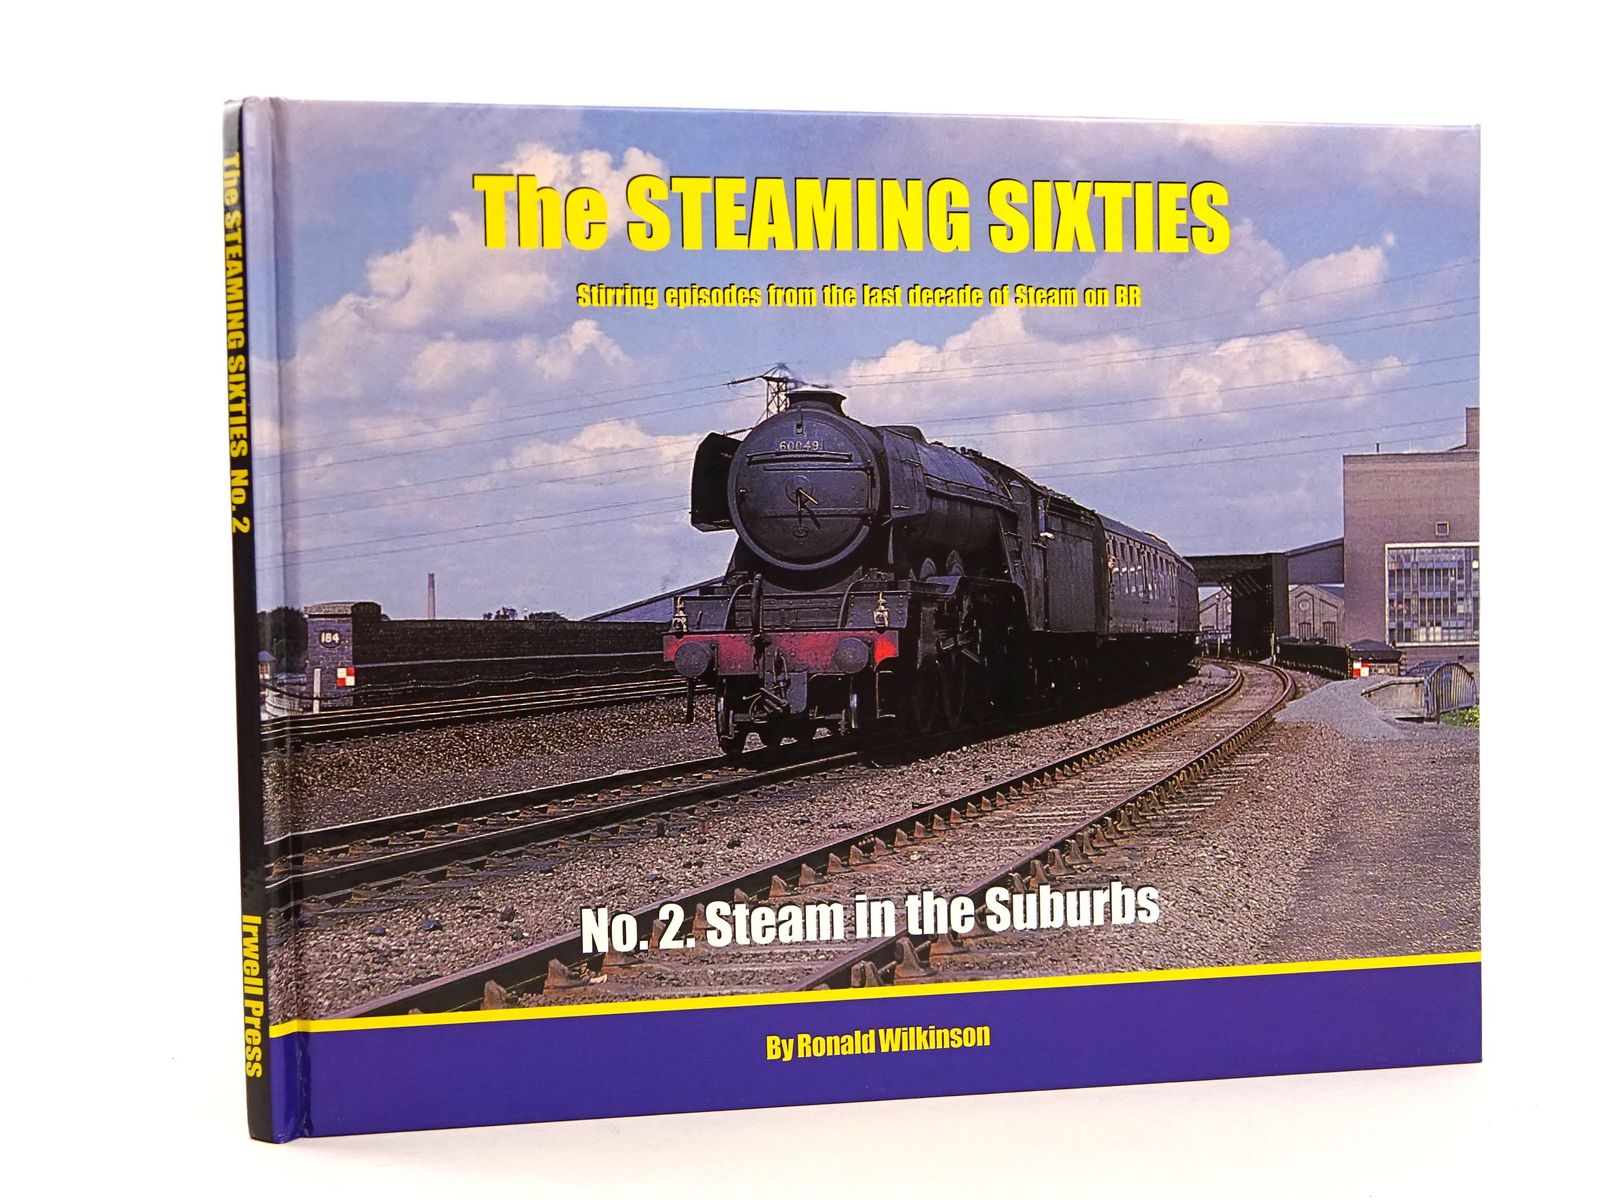 Photo of THE STEAMING SIXTIES: STIRRING EPISODES FROM THE LAST DECADE OF STEAM ON BR 2. STEAM IN THE SUBURBS written by Wilkinson, Ronald published by Irwell Press (STOCK CODE: 1818145)  for sale by Stella & Rose's Books